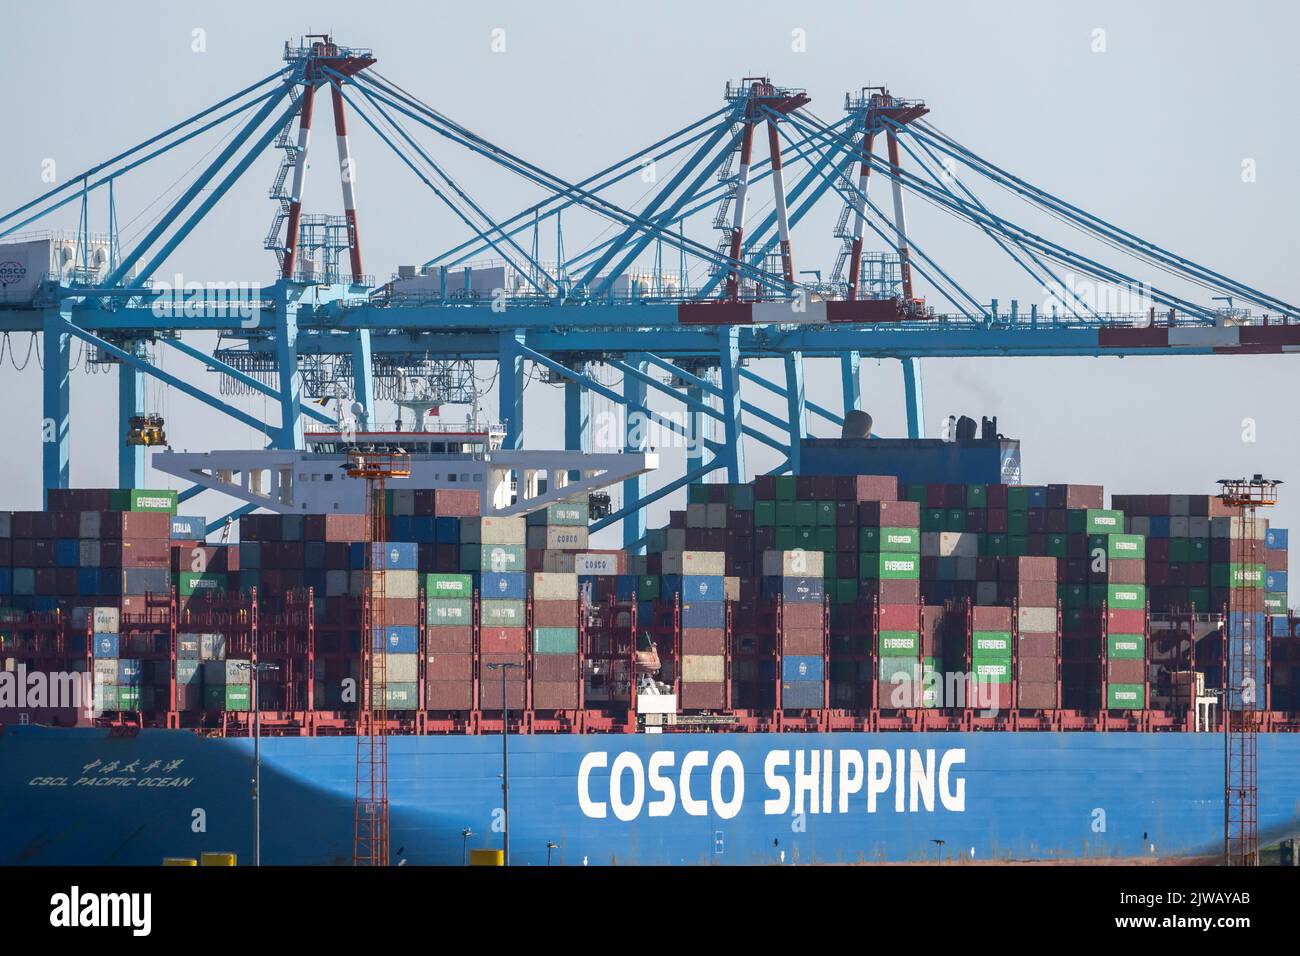 A Cosco Shipping cargo ship at dock in Bruges, Belgium. Stock Photo